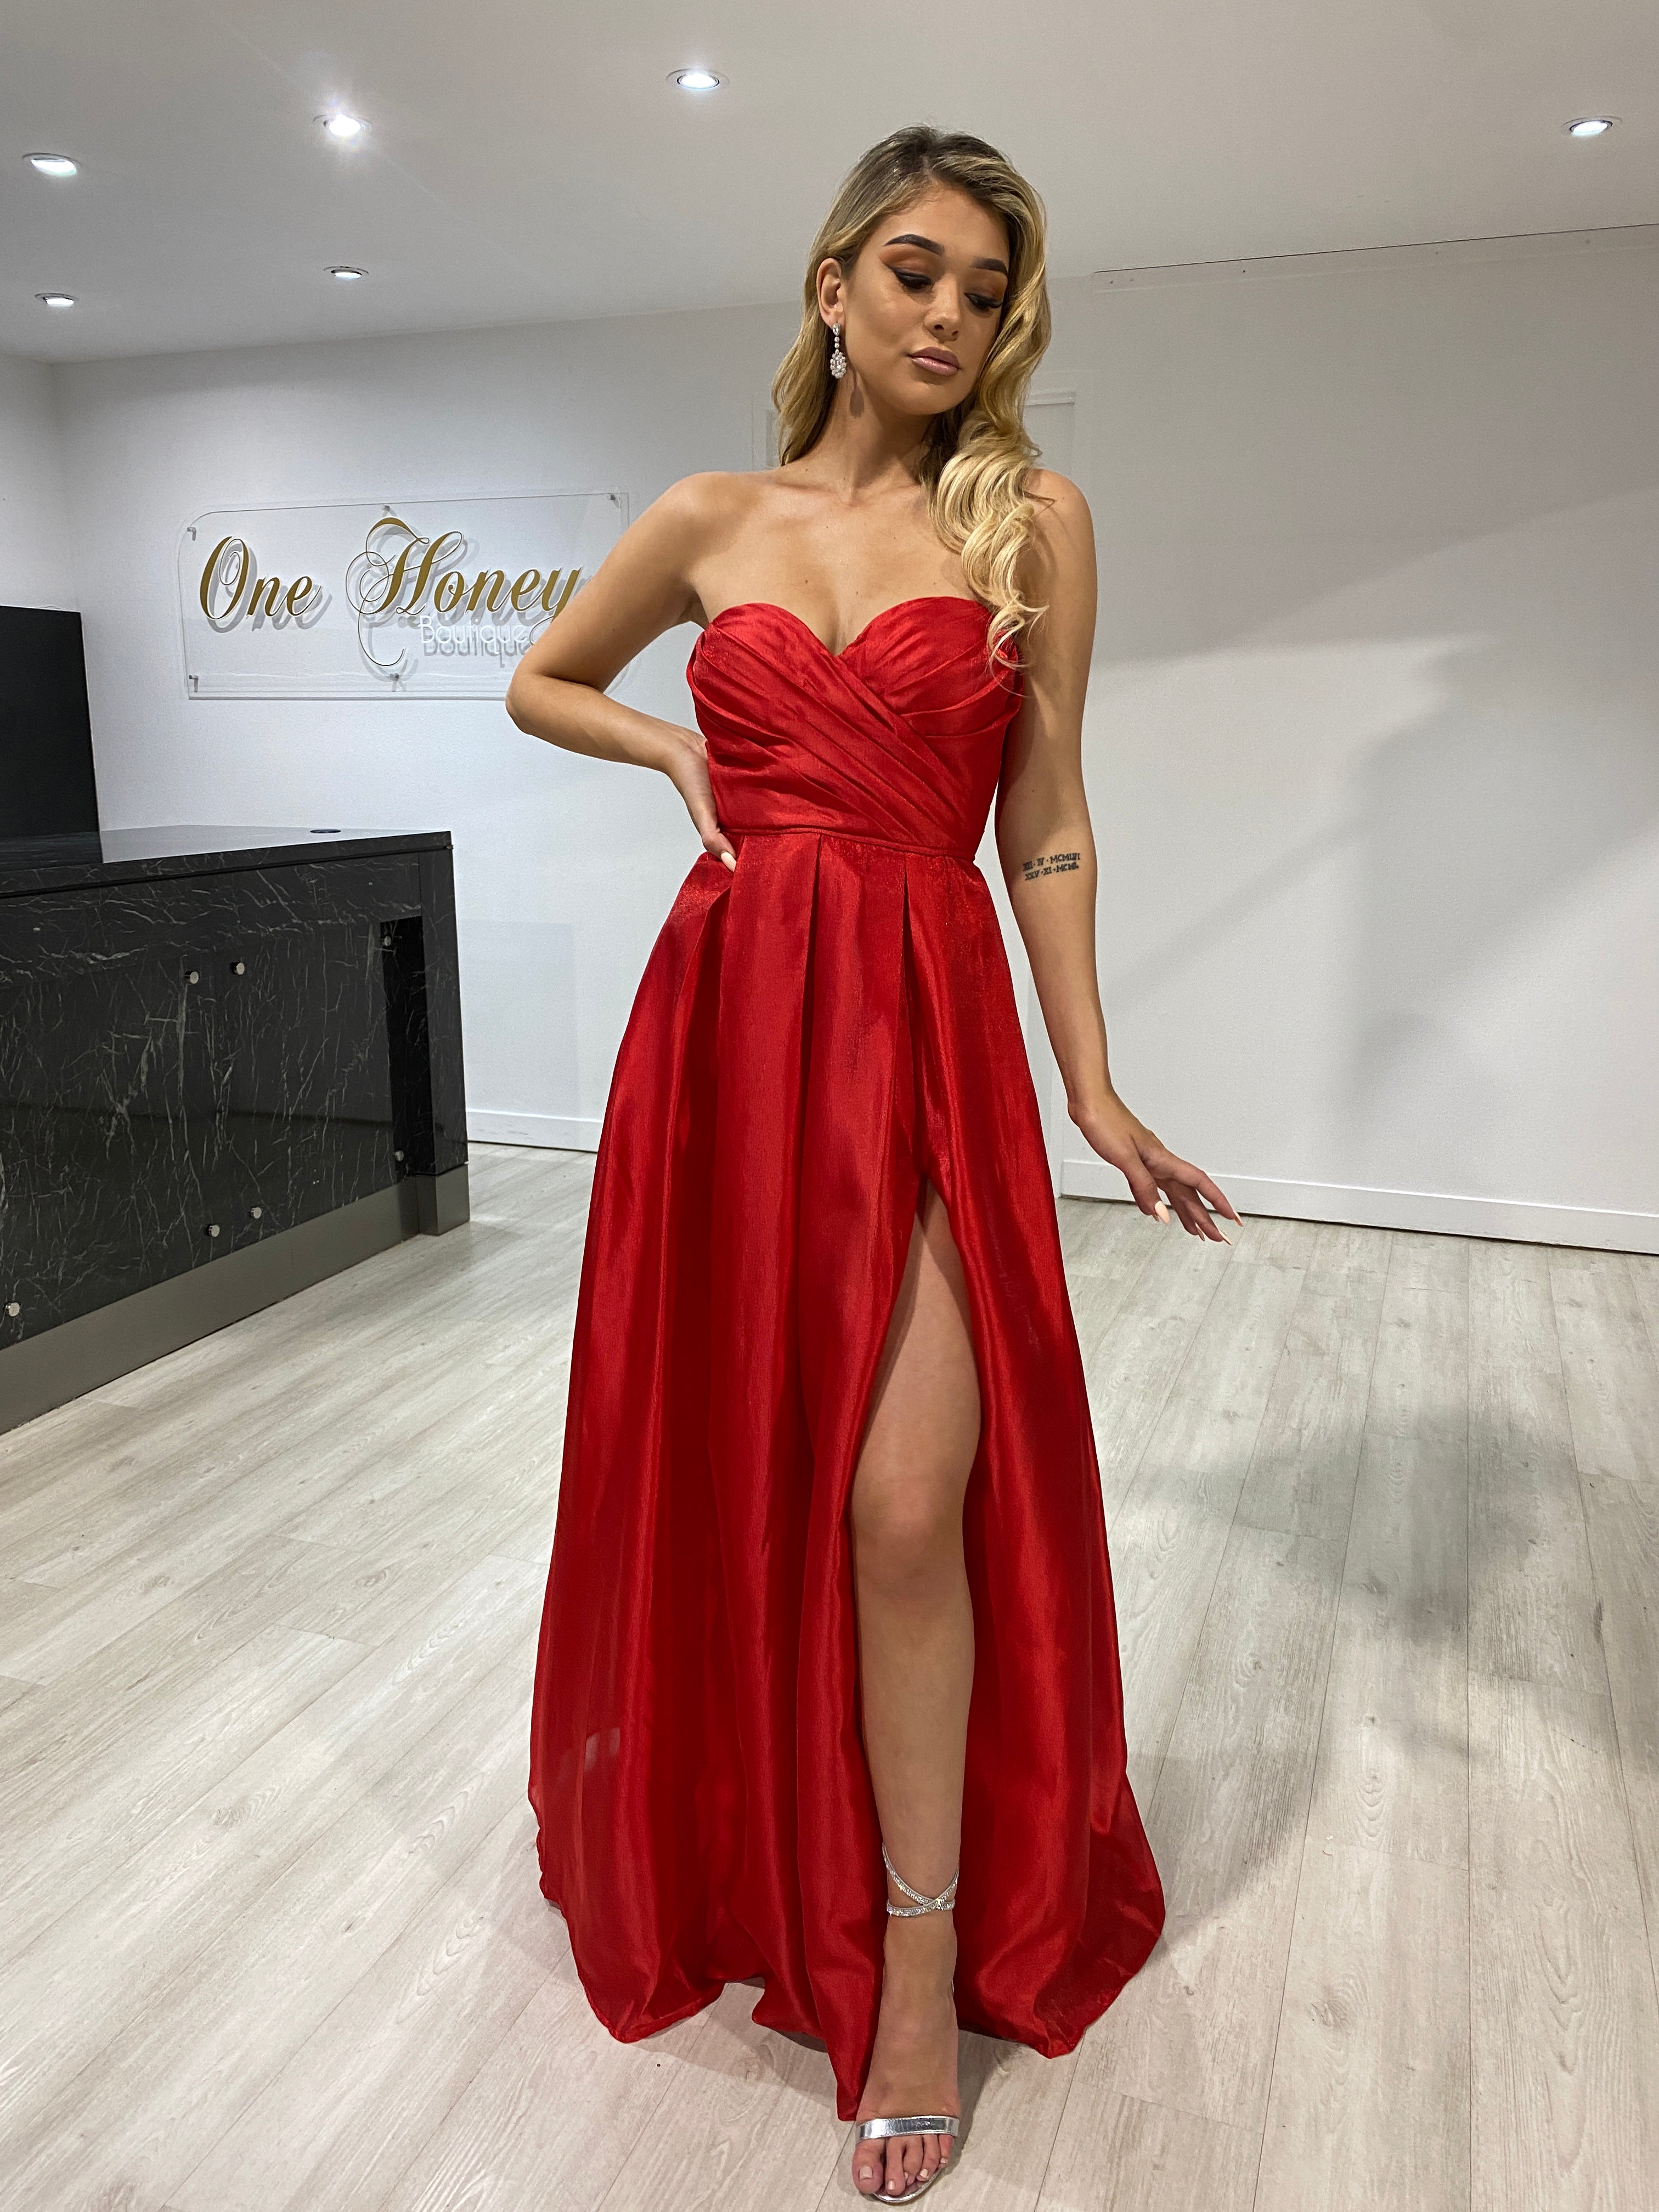 Honey Couture RUBY Red Strapless  Ballgown Formal Dress